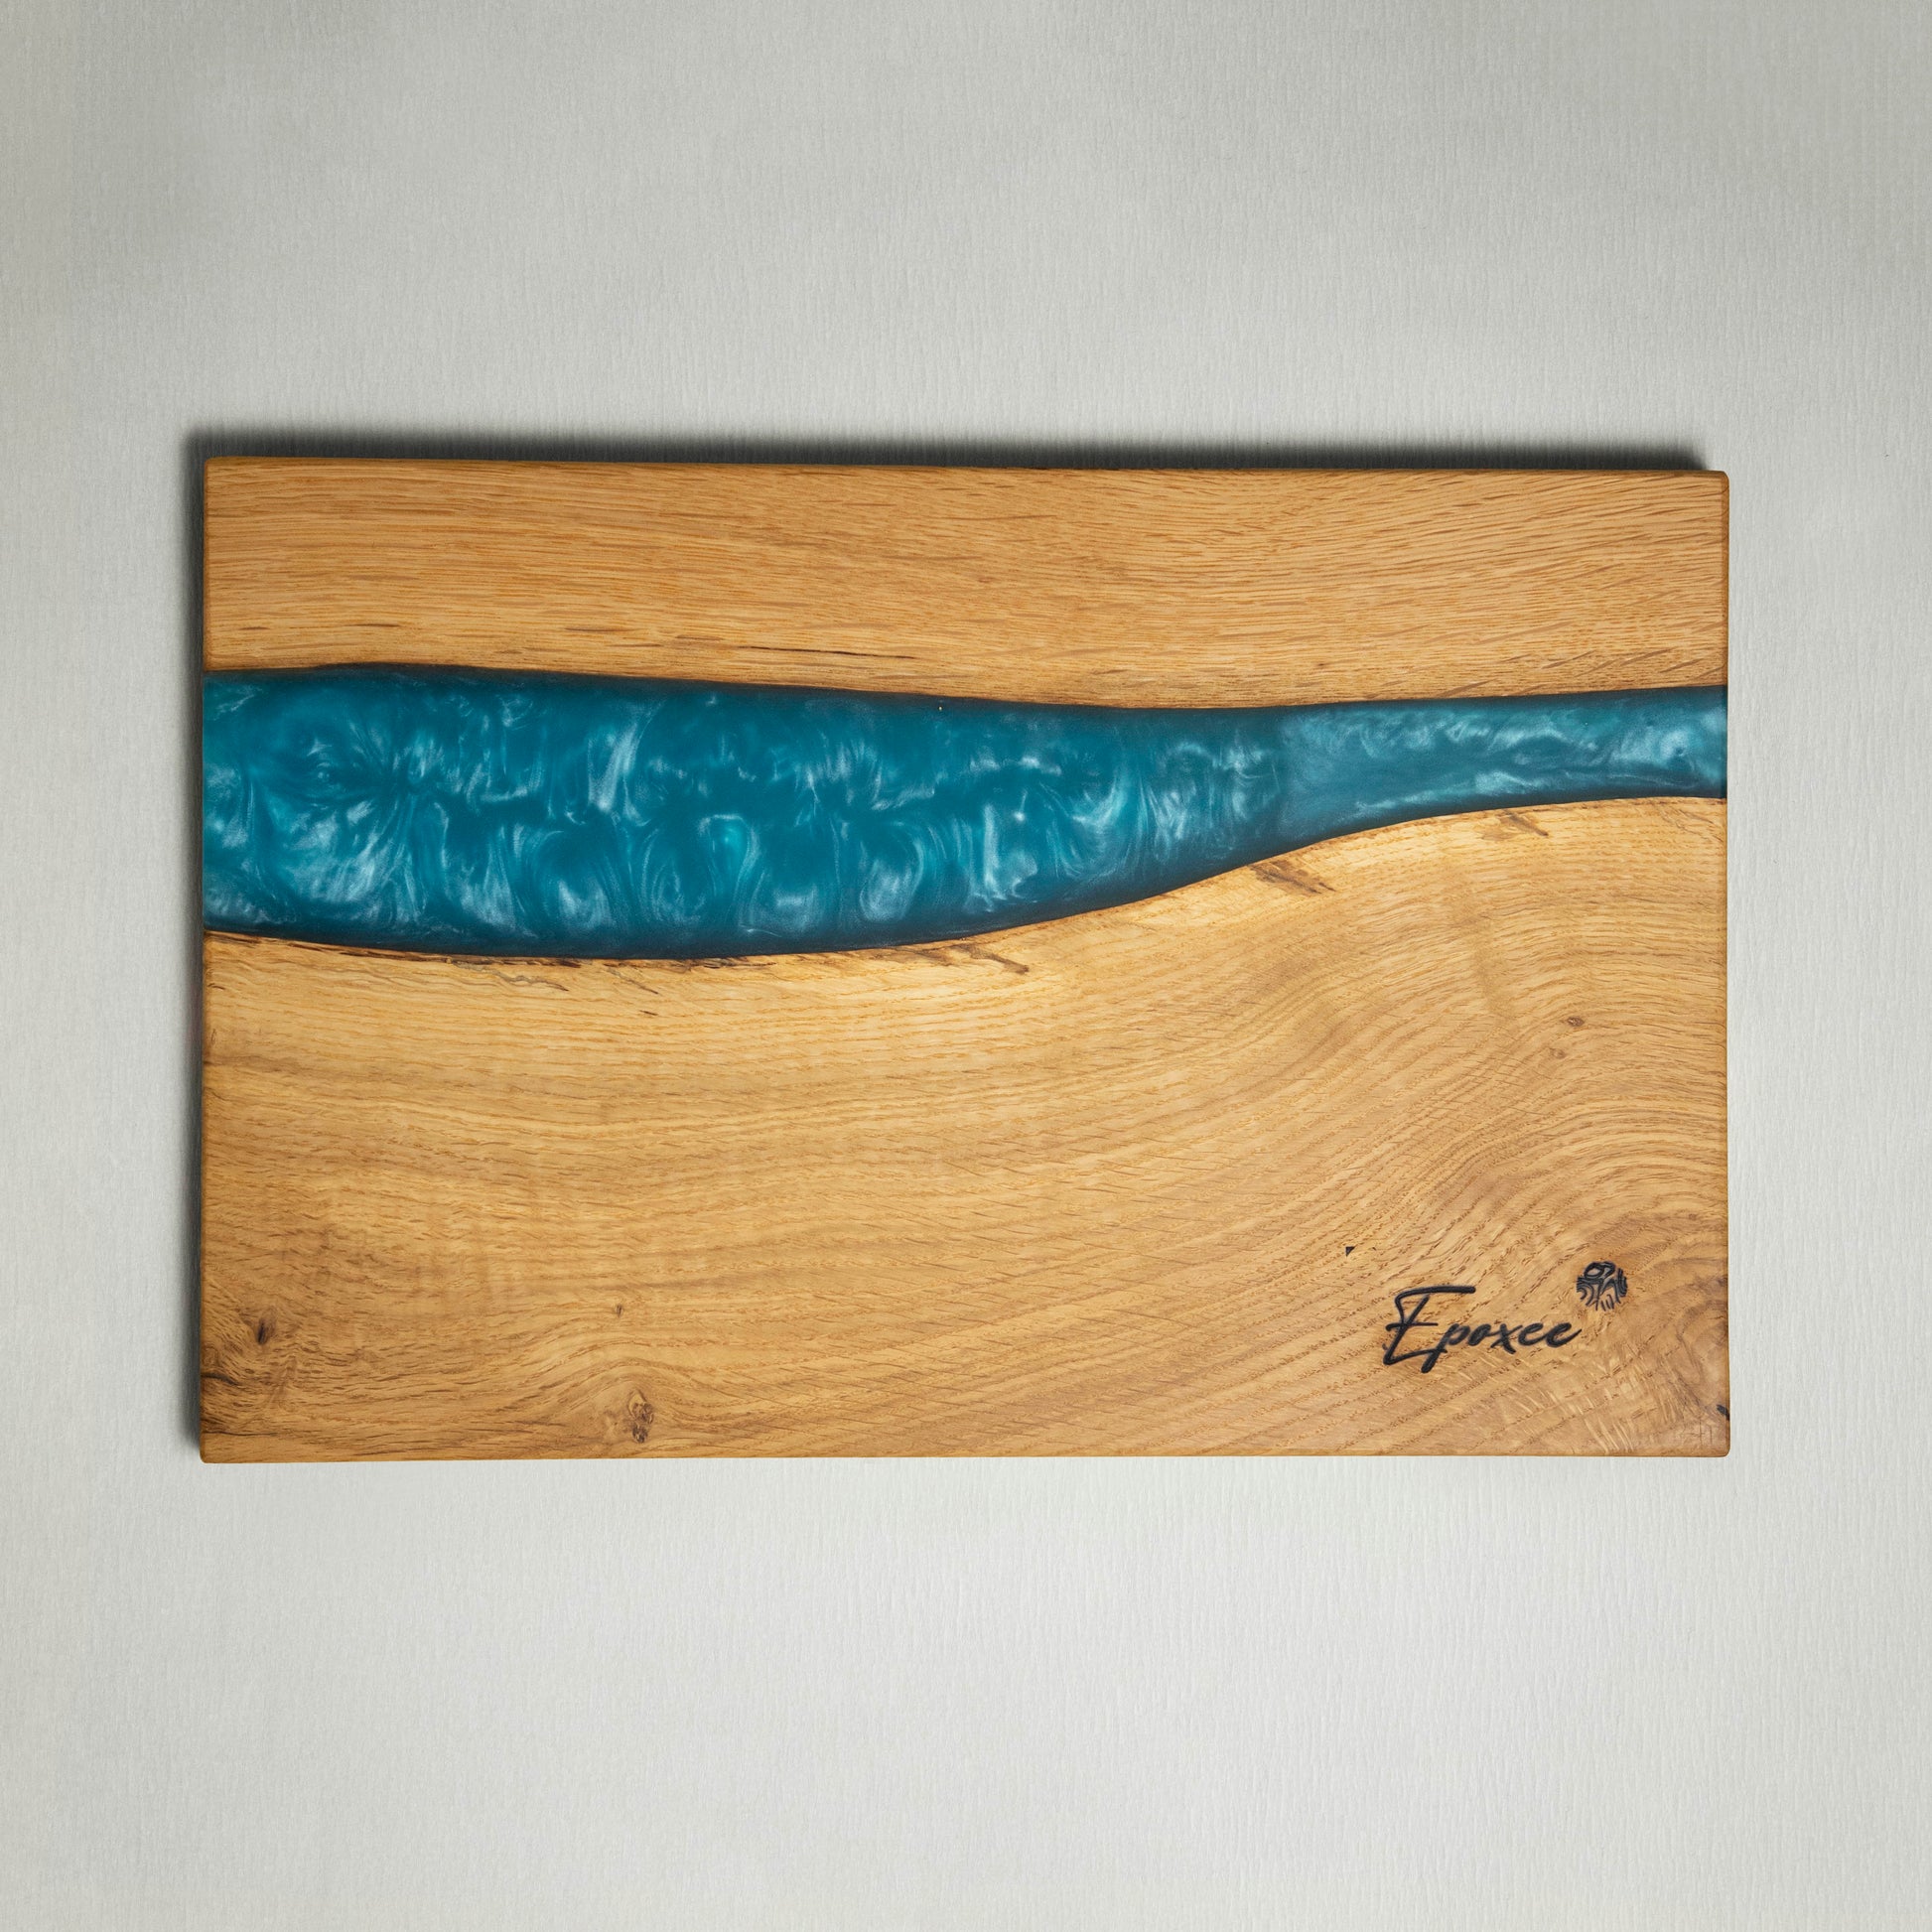 Serving board from wood made with epoxy resin in the color caribic blue